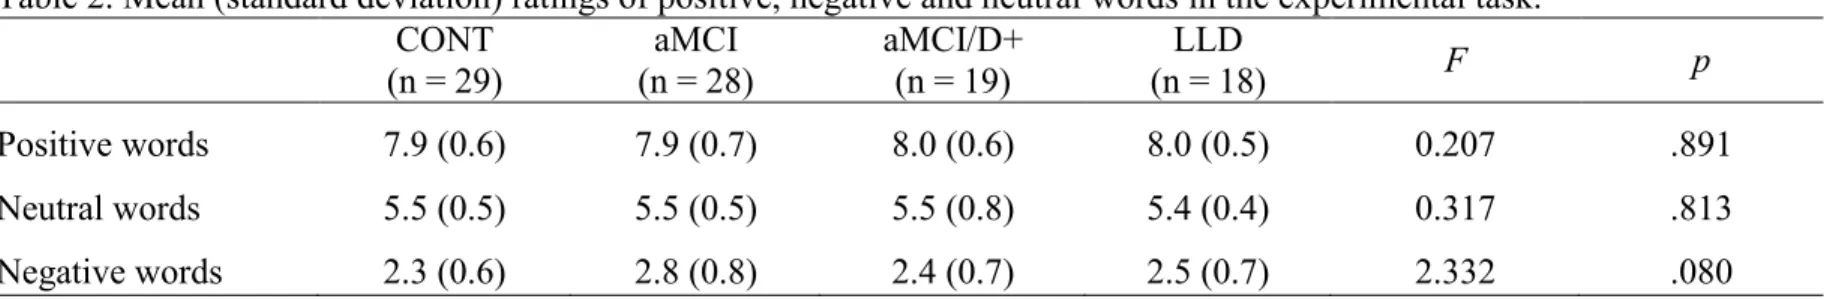 Table 2. Mean (standard deviation) ratings of positive, negative and neutral words in the experimental task